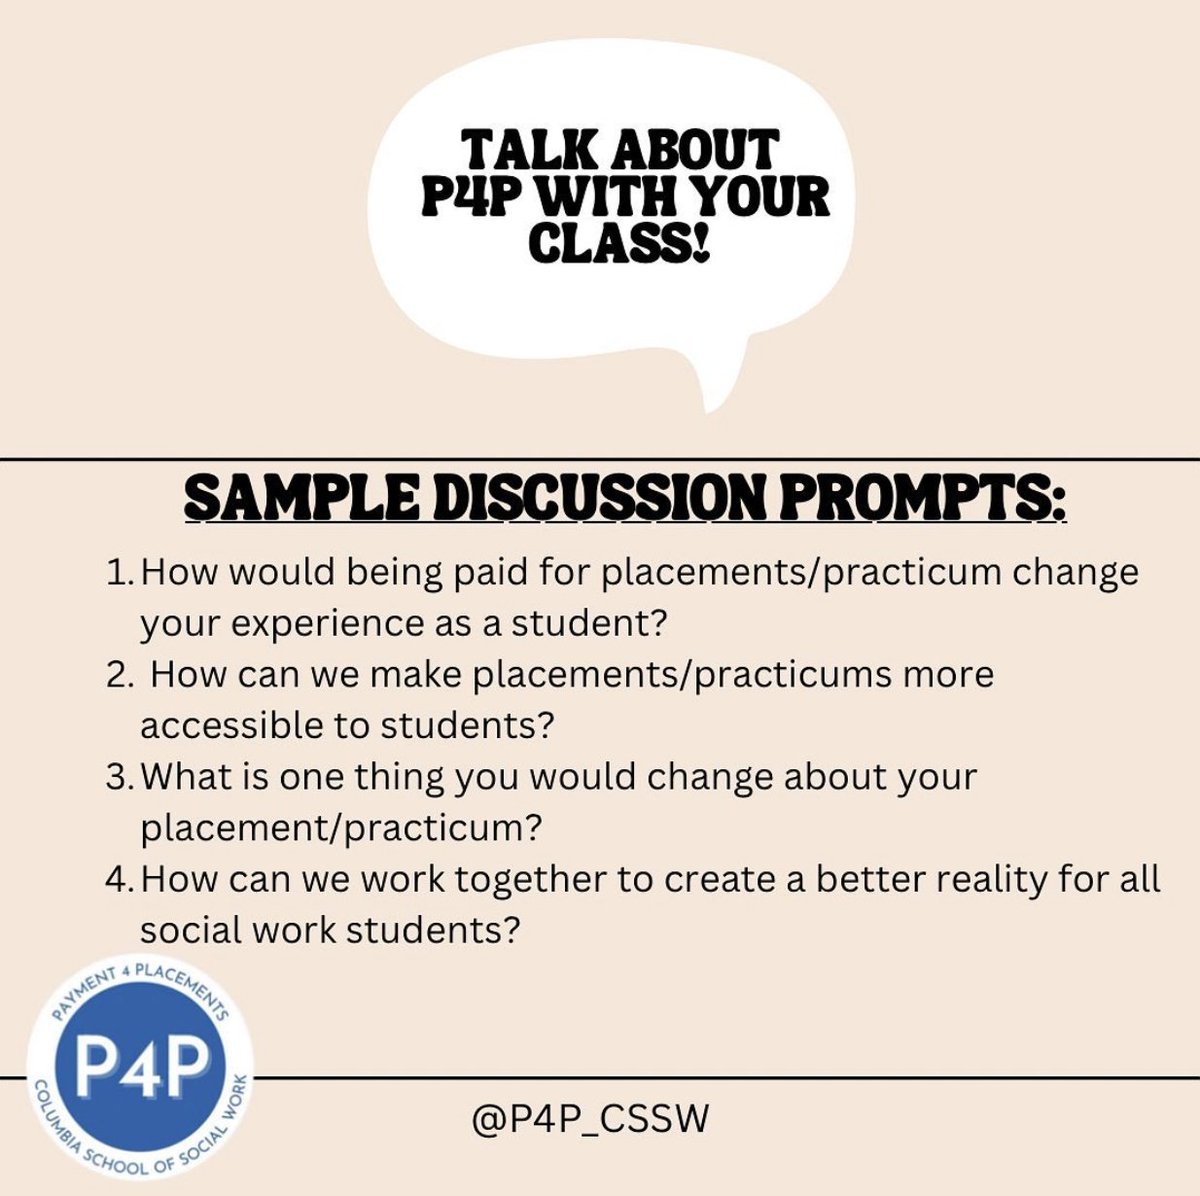 How would being #paid for your #requiredinternship change your experience as a student? #Socialworkstudents, talk to your professors & classmates about the need for paid field placements! 

#P4P #CSSW @p4p_cssw
#unpaidisunfair #endunpaidinternships #payinterns